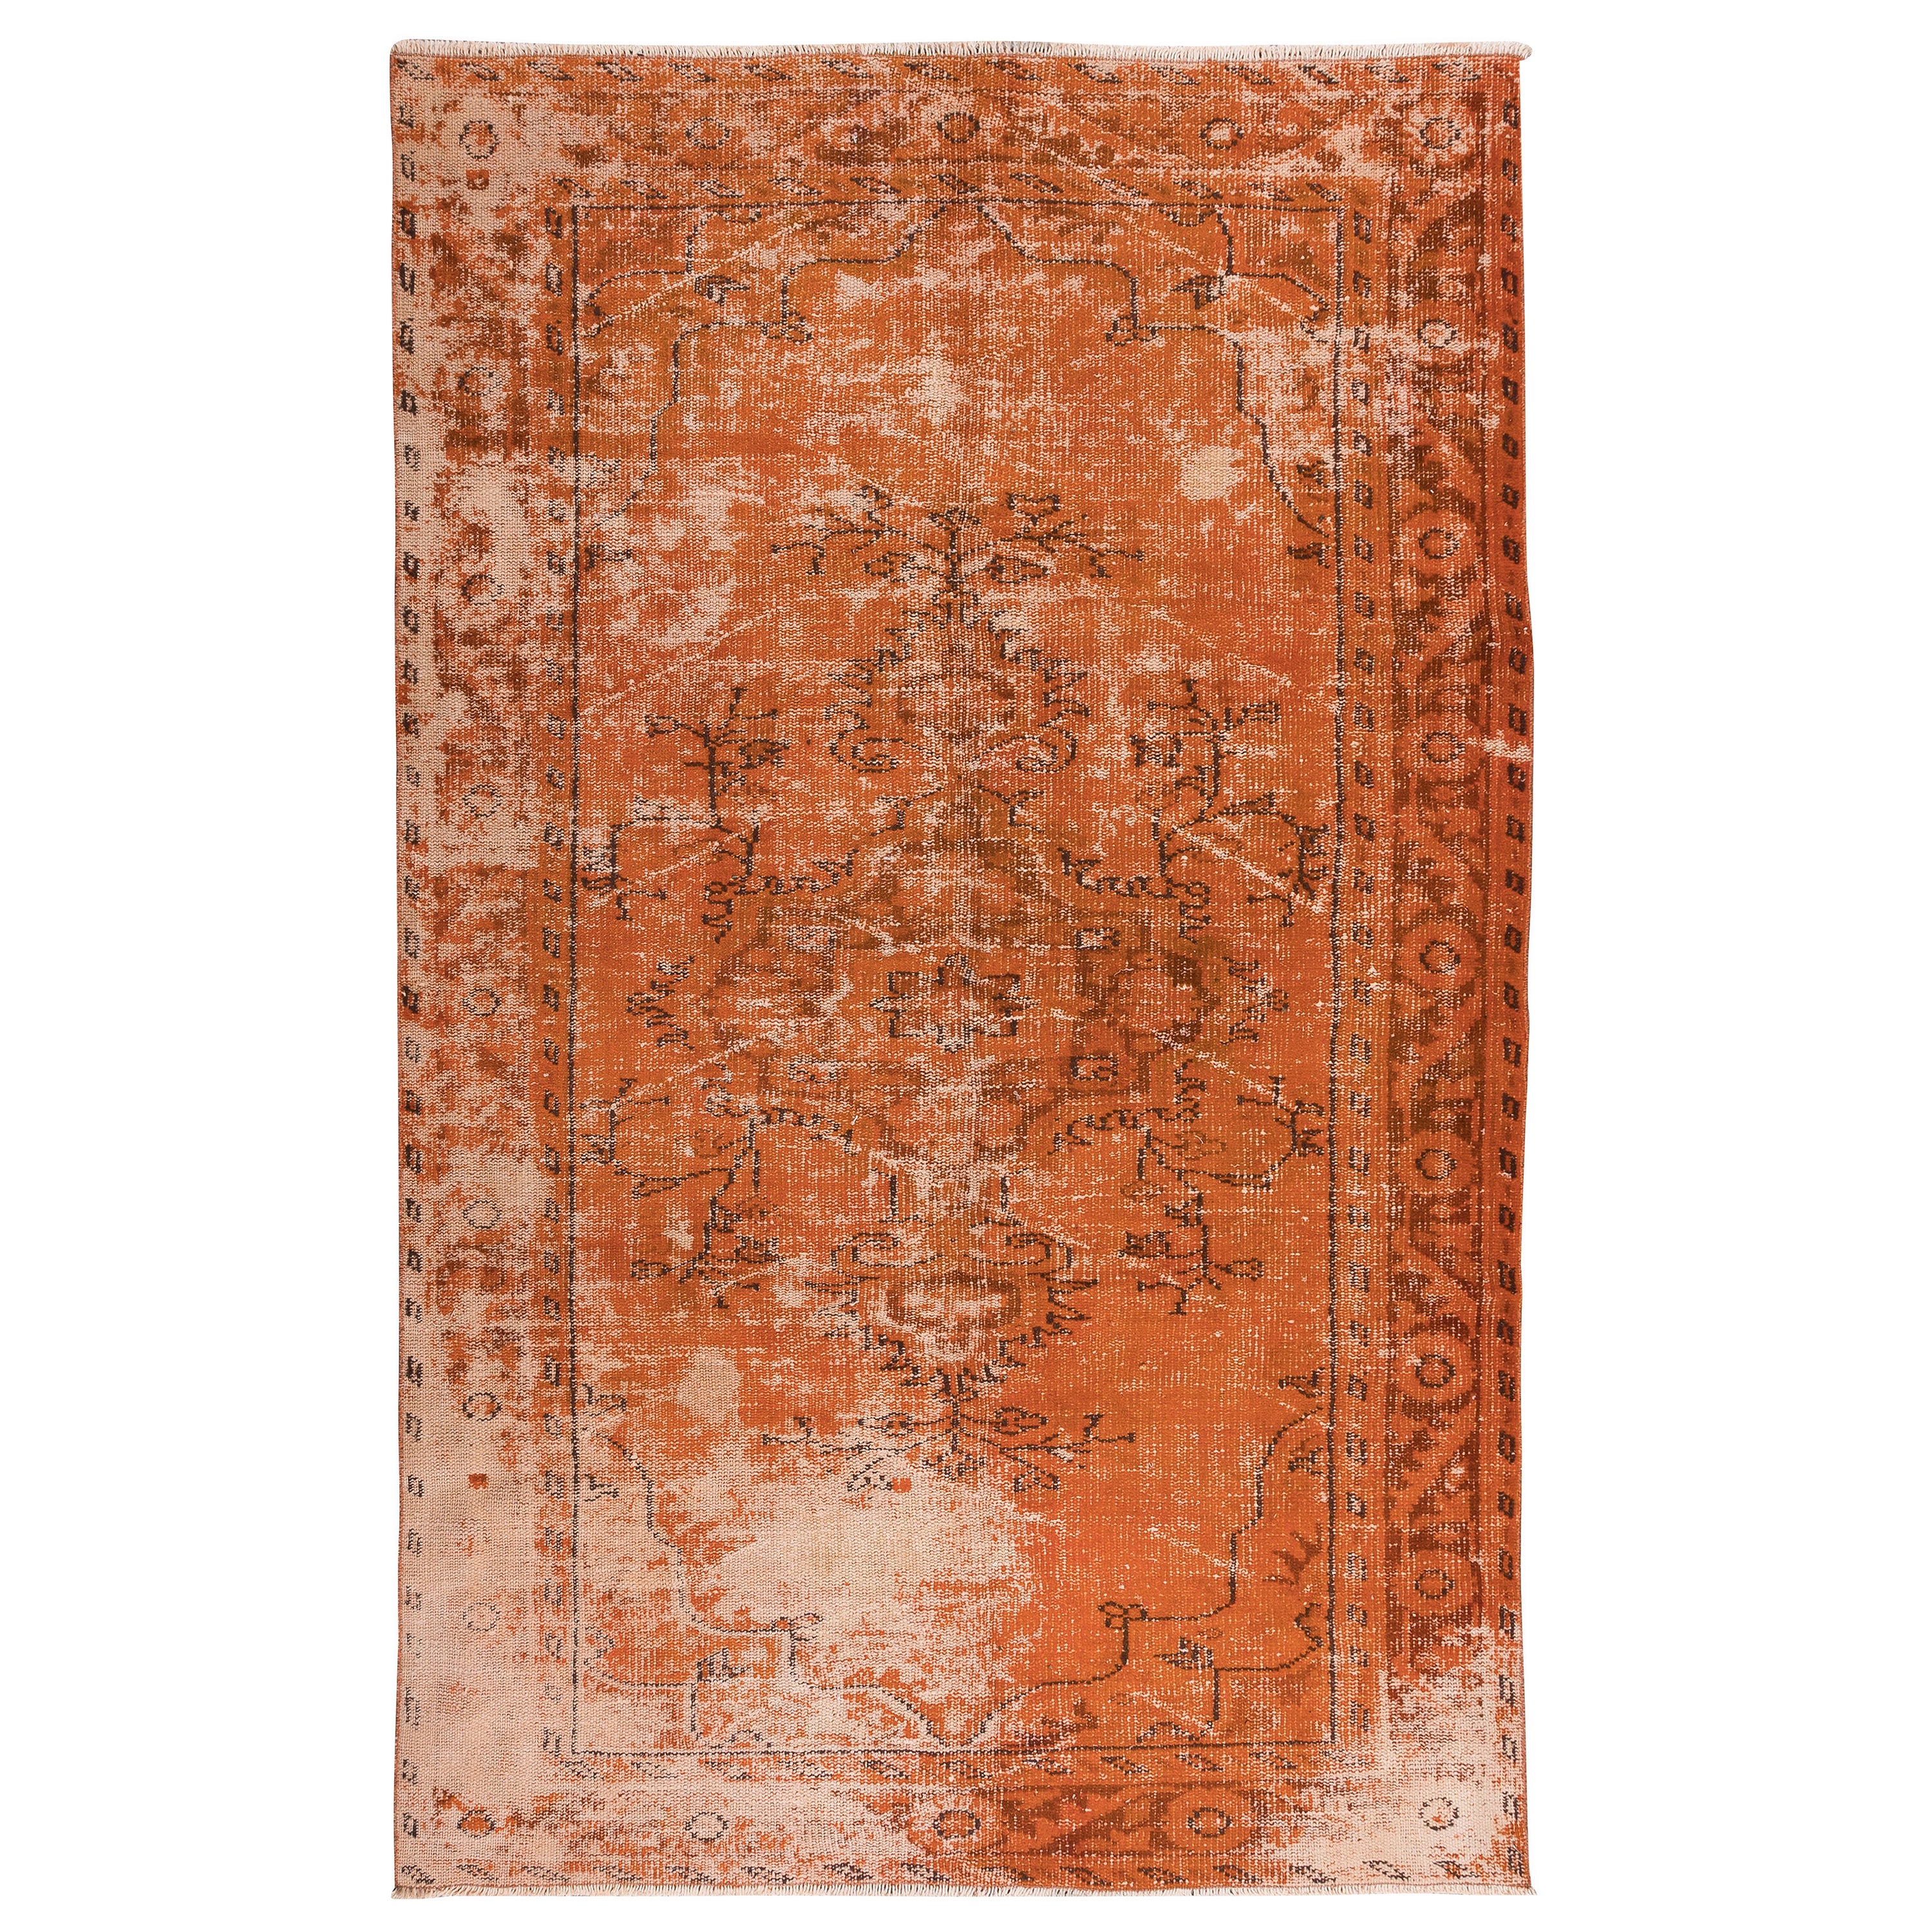 5.4x8.4 Ft Handmade Turkish Vintage Rug with Shabby Chic Style in Orange Tones For Sale